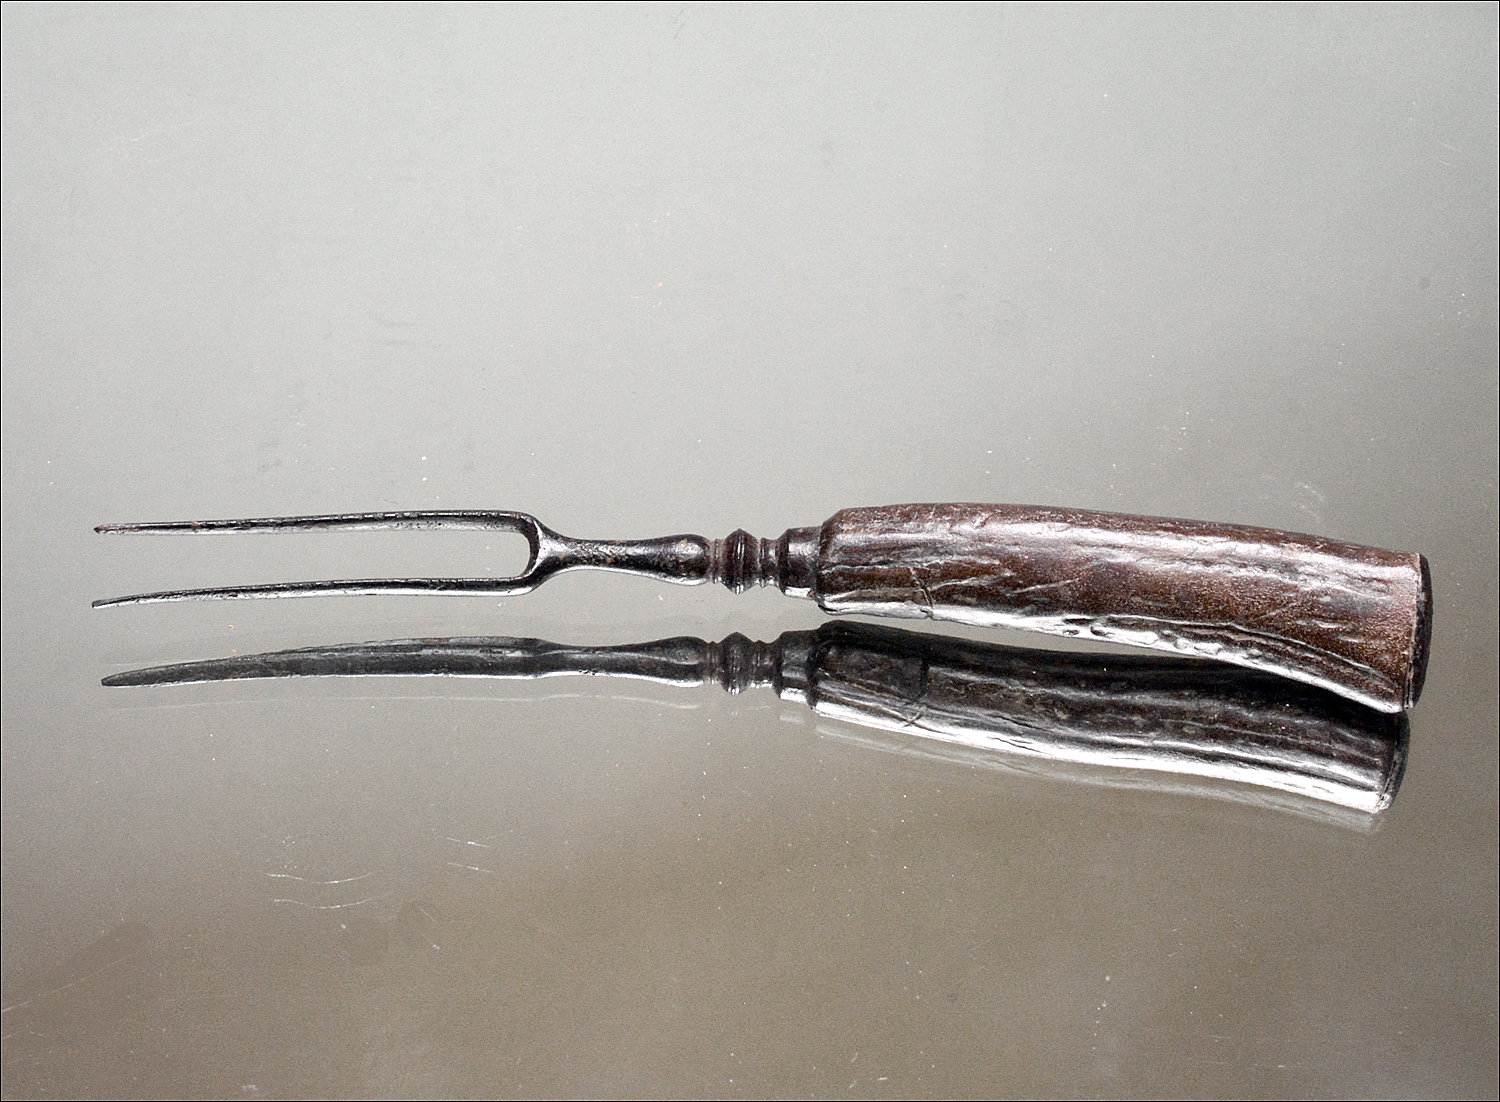 18th century two-pronged fork with bone handle.